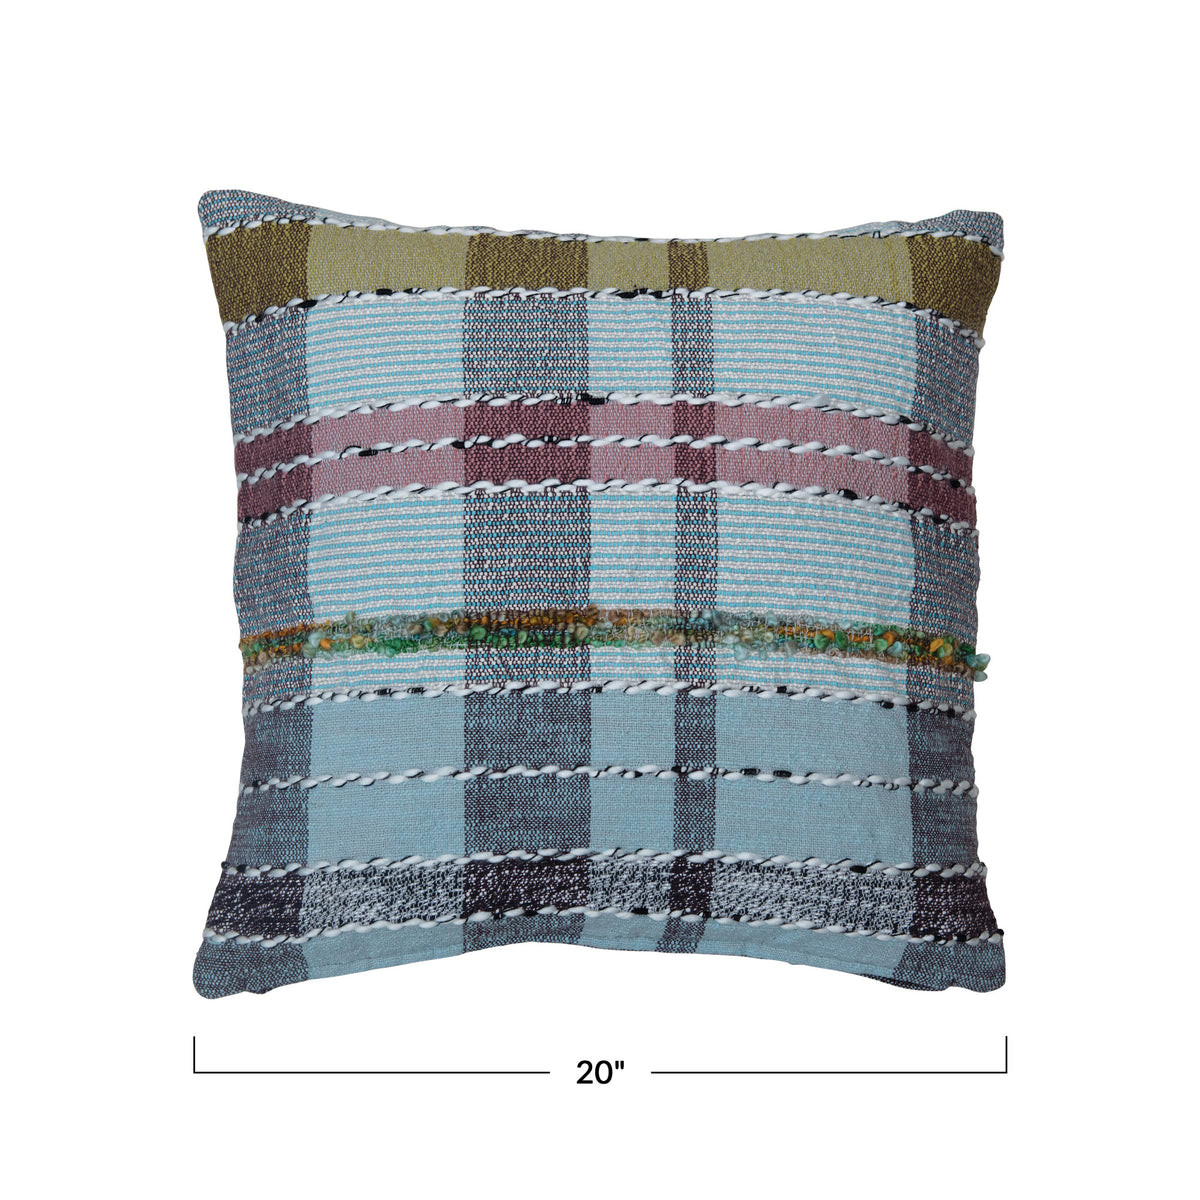 20"S Woven Cotton & Wool Madras Plaid Pillow